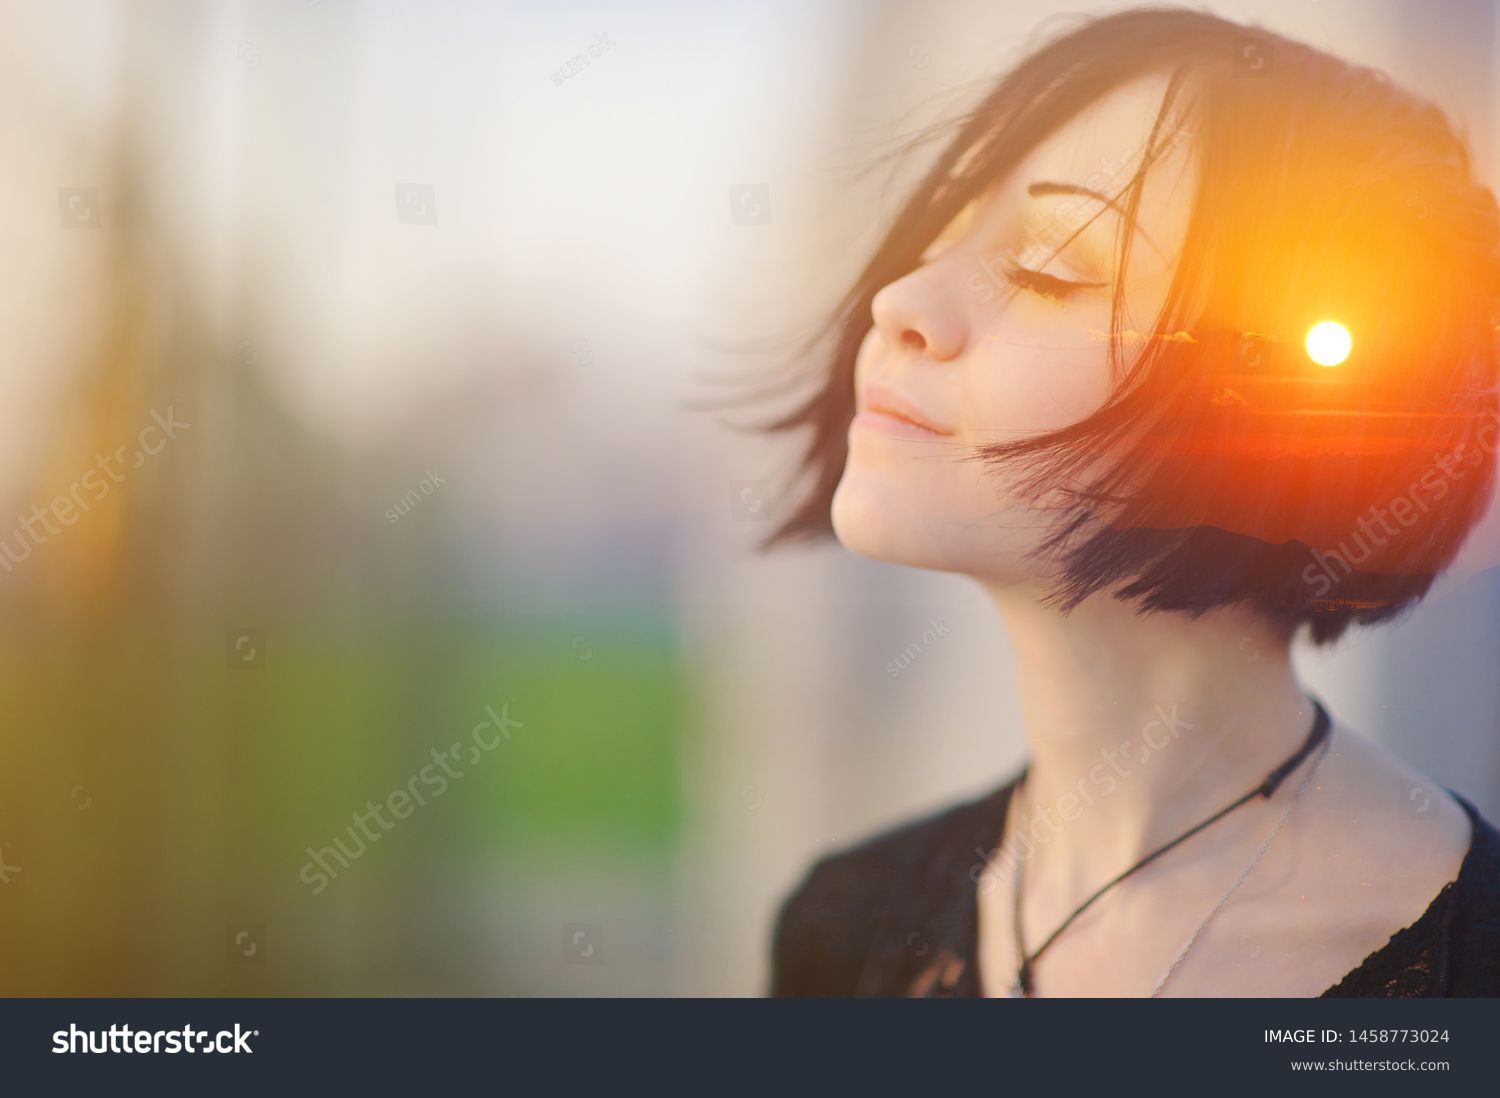 Double multiply exposure portrait of a dreamy cute woman meditating outdoors with eyes closed, combined with photograph of nature, sunrise or sunset, closeup. Psychology freedom power of mind concept #1458773024